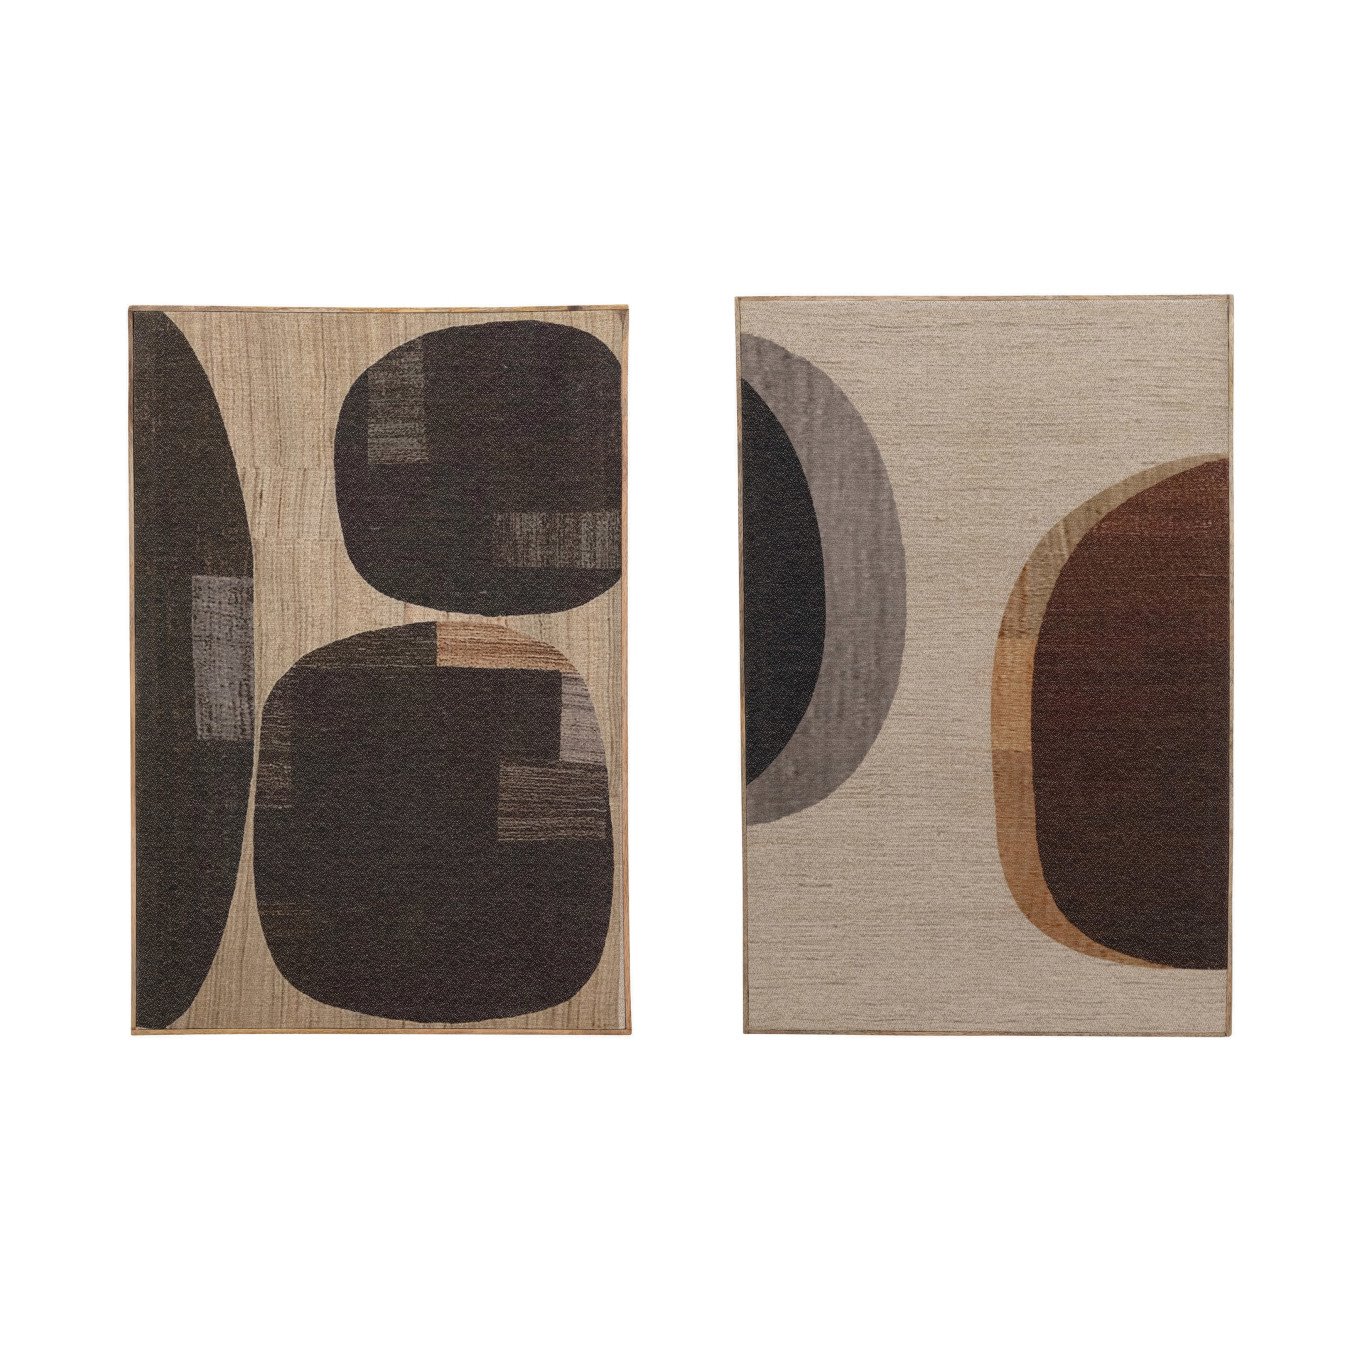 Mango Wood Framed Fabric Wall Decor with Abstract Print, Black & Beige, 2 Styles